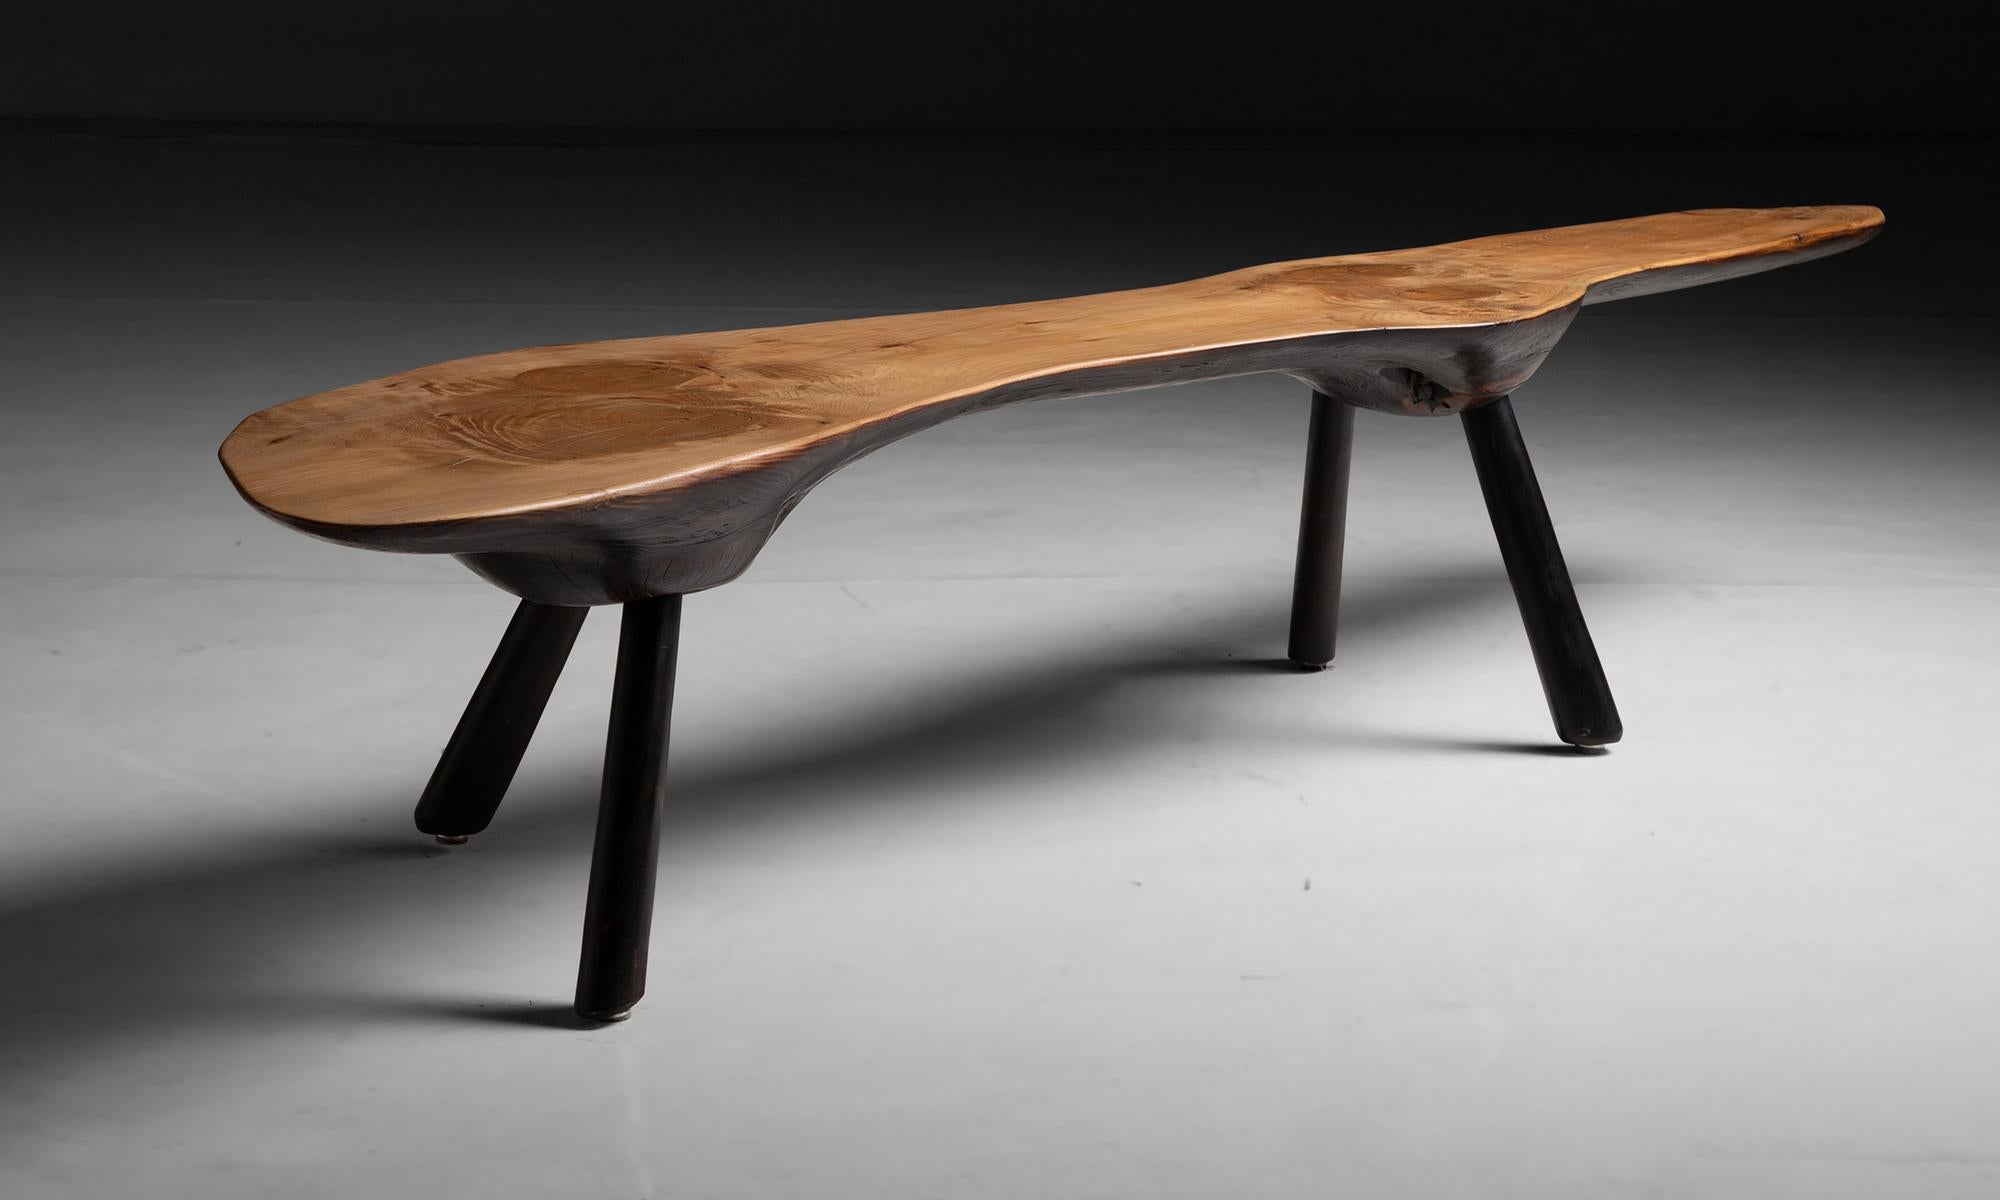 Wood Coffee Table

Made in Wales

Composed of cypress wood with Sugi Ban base and legs.

Measures 89.5”L x 16.25”d x 16.5”h